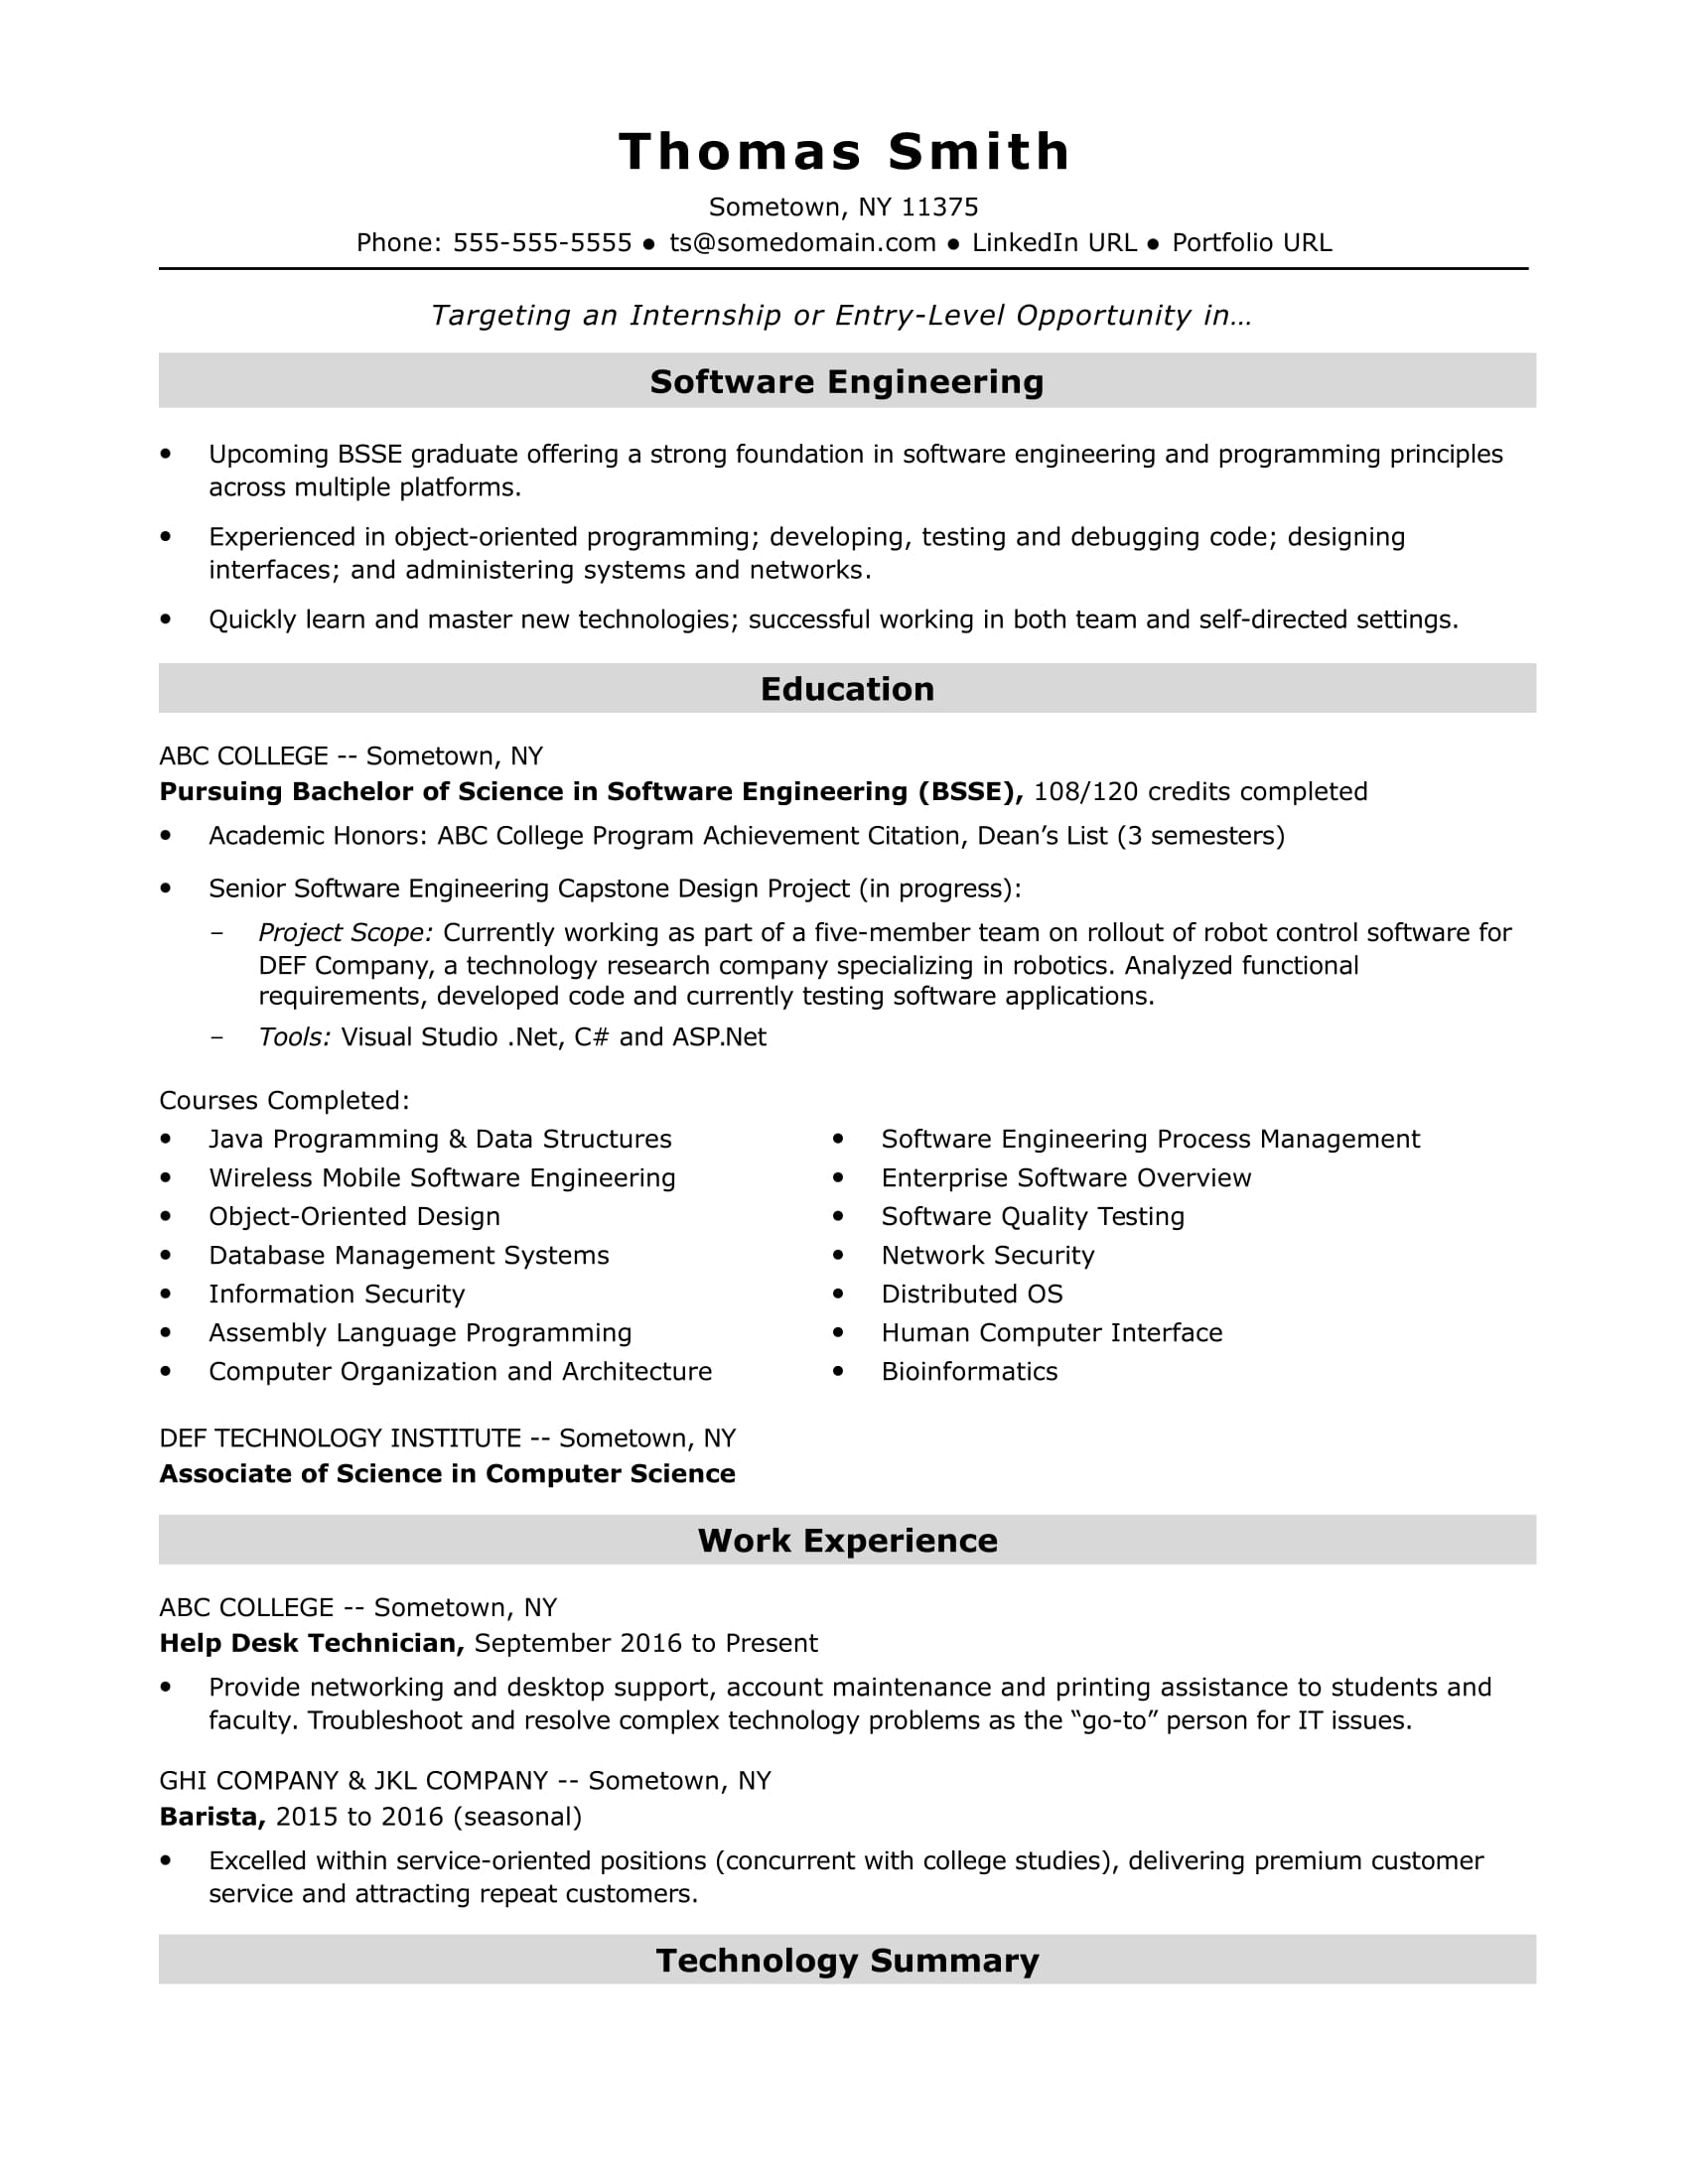 Computer engineering resume cover letter technology